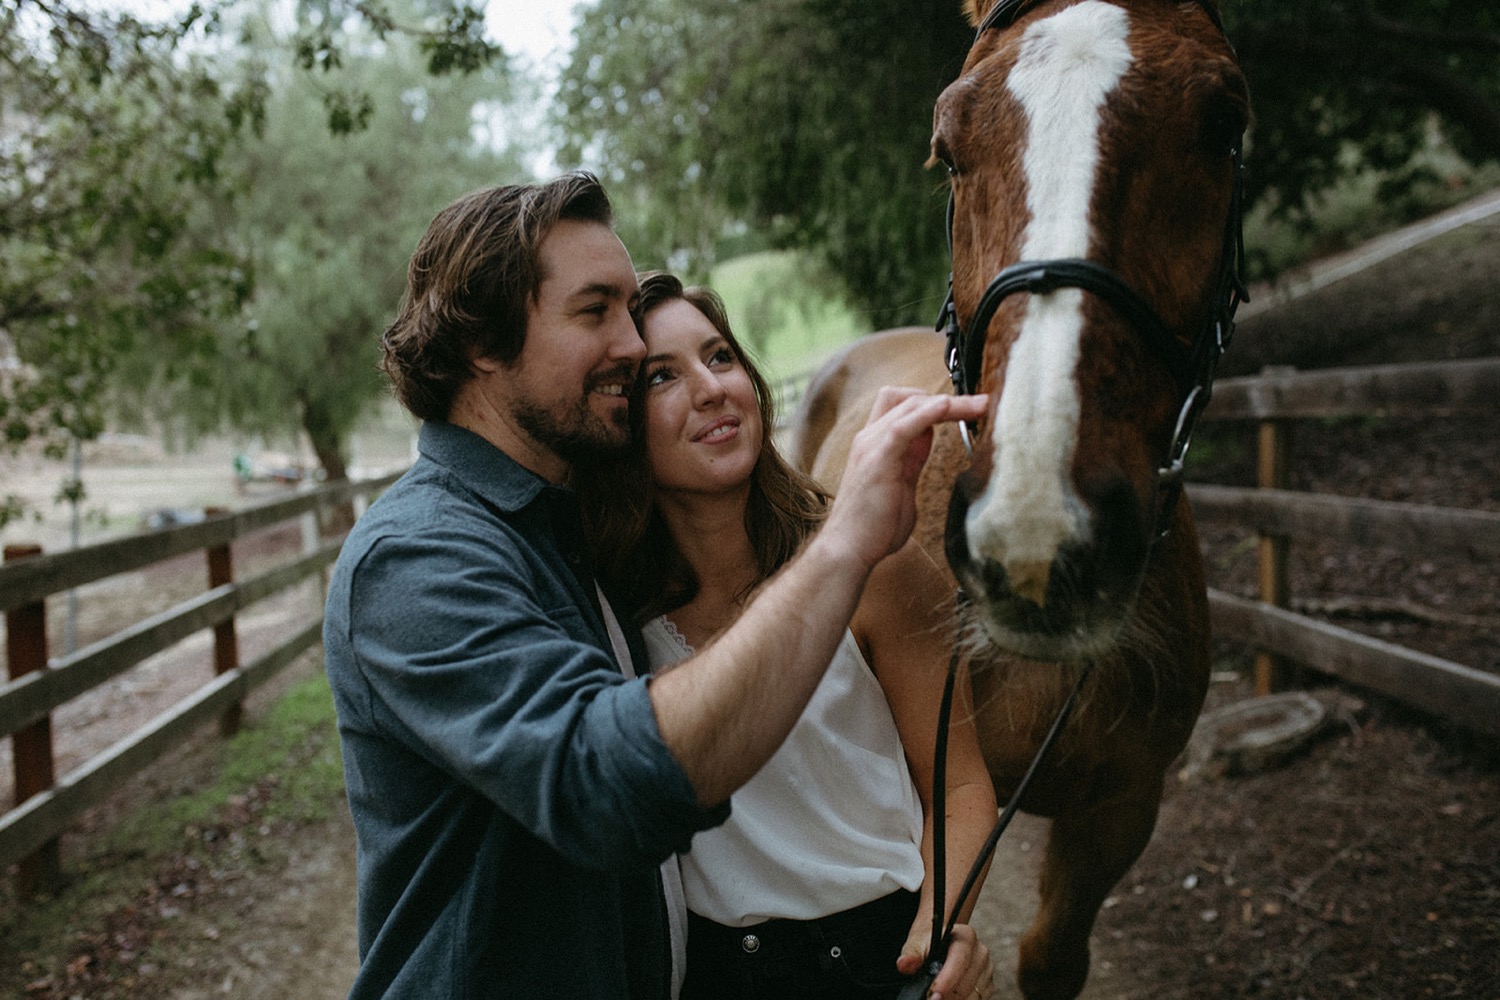 Couple pose with horse for their engagement session.